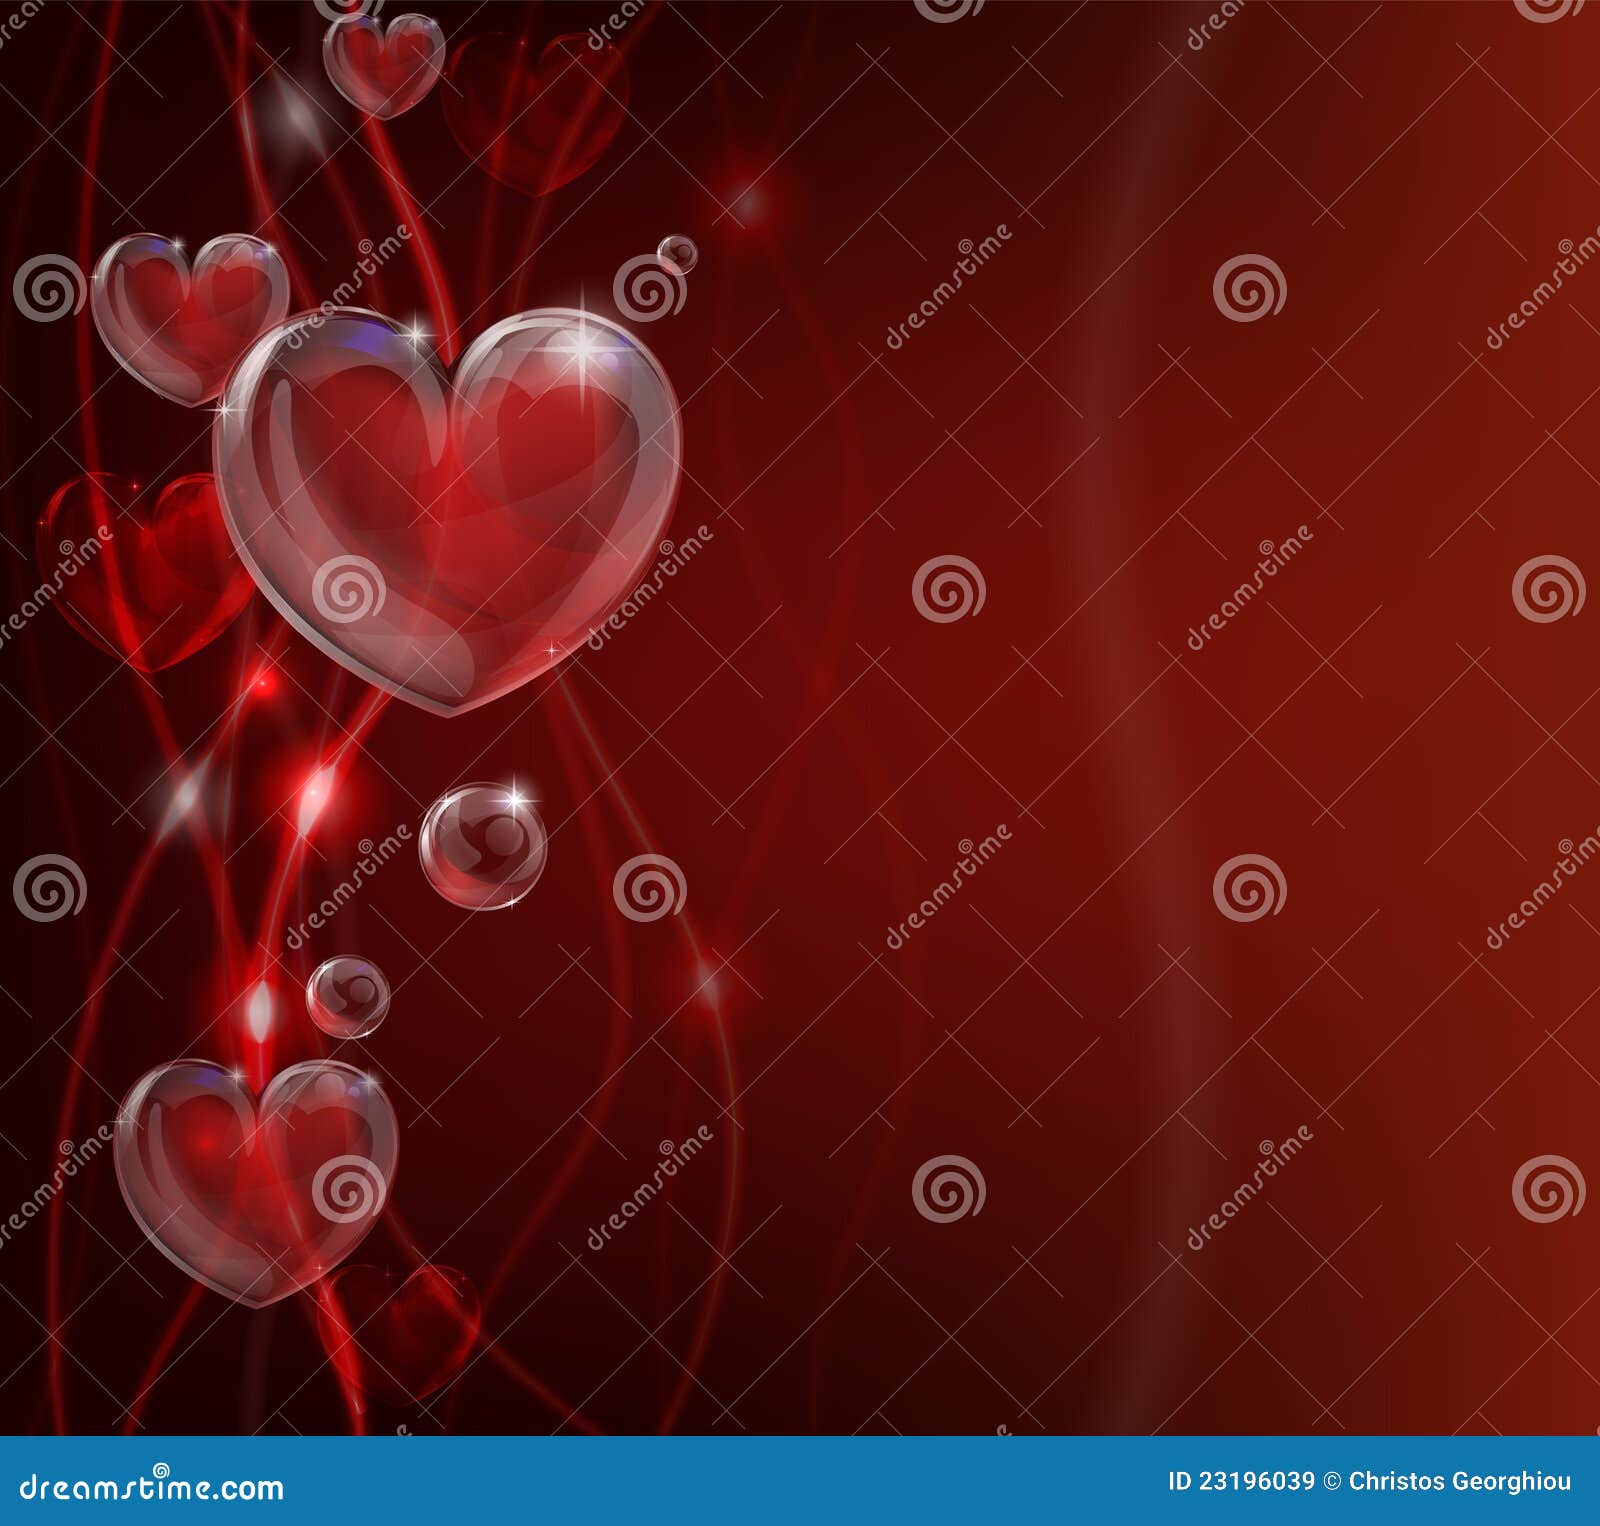 Abstract Valentines Day Heart Background Royalty Free Stock Images - Image: 231960391300 x 1257